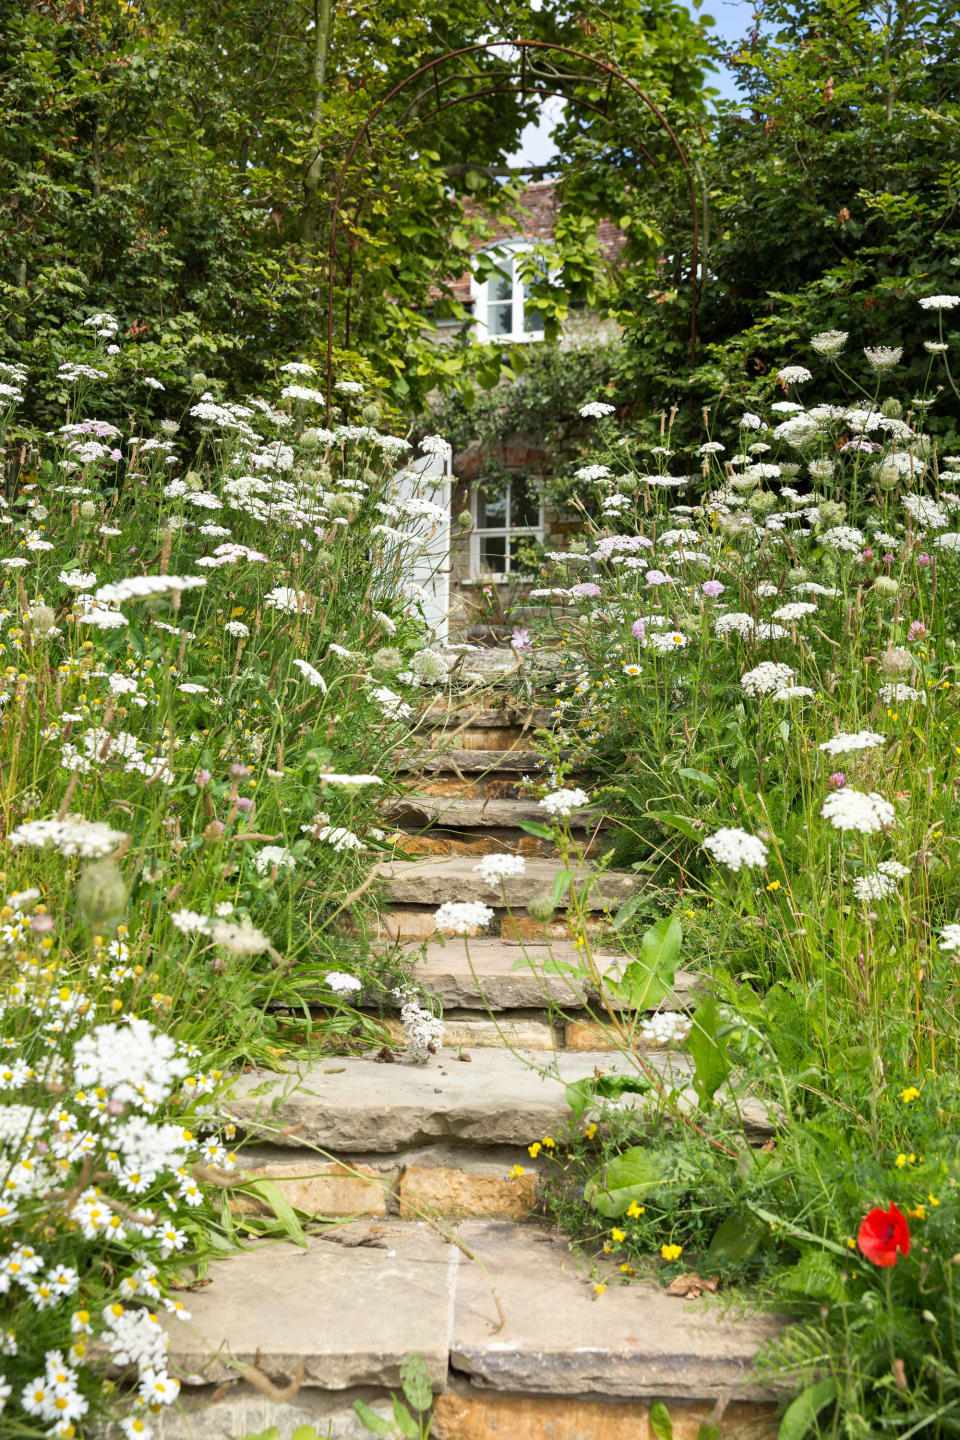 <p> No garden approach can be more romantic than threading your way through swaying meadow grasses and flowers up the garden steps. Few of us are lucky enough to have this very situation at home though, so we need to be a little creative.&#xA0; </p> <p> Reclaimed flagstones make the perfect steps for cottage gardens. Already worn and marked by years of use, they can be set into an existing slope, supported by salvaged bricks, to create a pathway full of personality.&#xA0; </p> <p> Cover the neighboring banks of soil with easy-to-lay matting pre-sown with native flowering meadow grasses. If you are more impatient, go for plug plants interspersed with more mature perennials right next to the steps.&#xA0; </p>